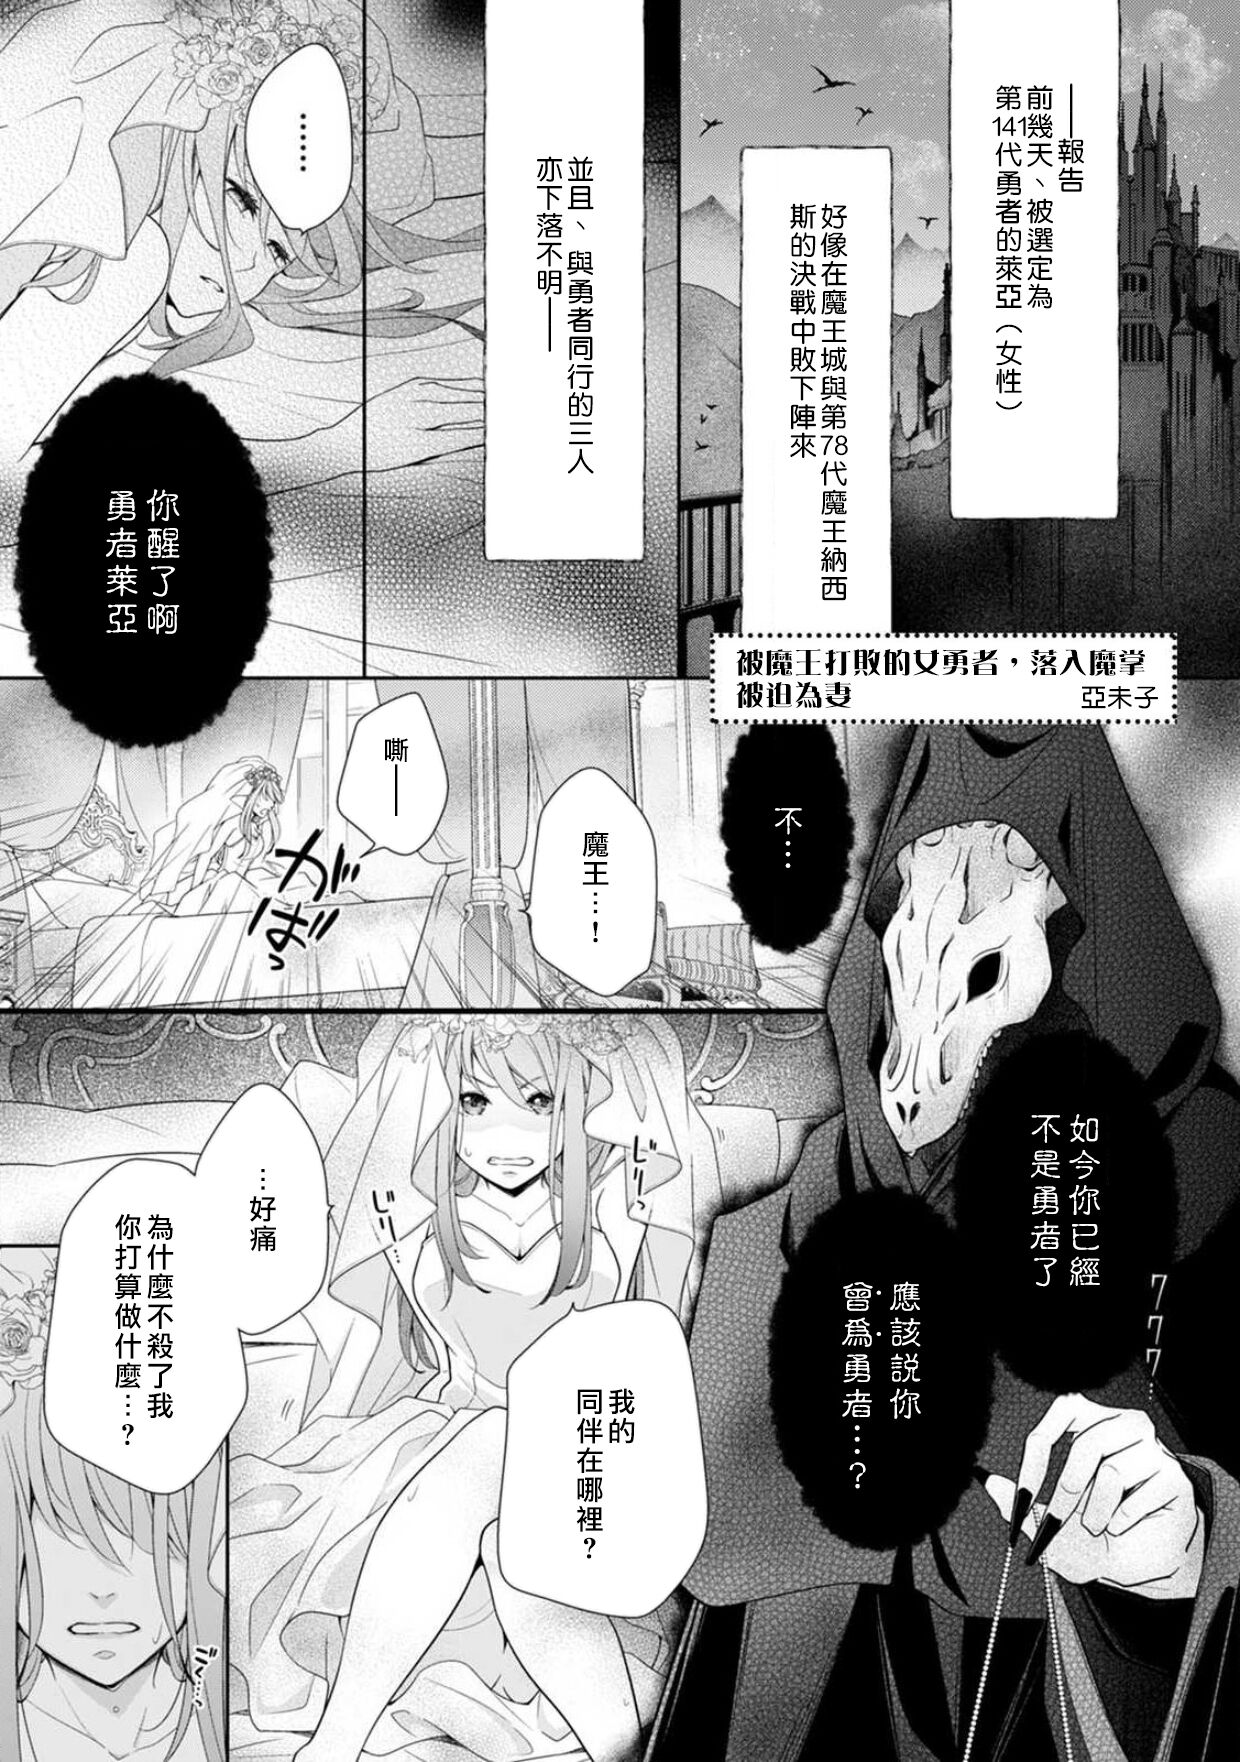 [ami_eo] A female hero who is defeated by the demon king falls into his hands and is married (If you are embraced by a bad man... you can't escape from the trap of pleasure Volume 3) | 被魔王打败的女勇者，落入魔掌被迫做他的妻子 [Chinese] [莉赛特汉化组] [亜未子] 魔王に敗れた女勇者は、その手に墮ちて娶られる (悪い男に抱かれたら…快楽のワナから逃れられない 3巻) [中国翻訳]